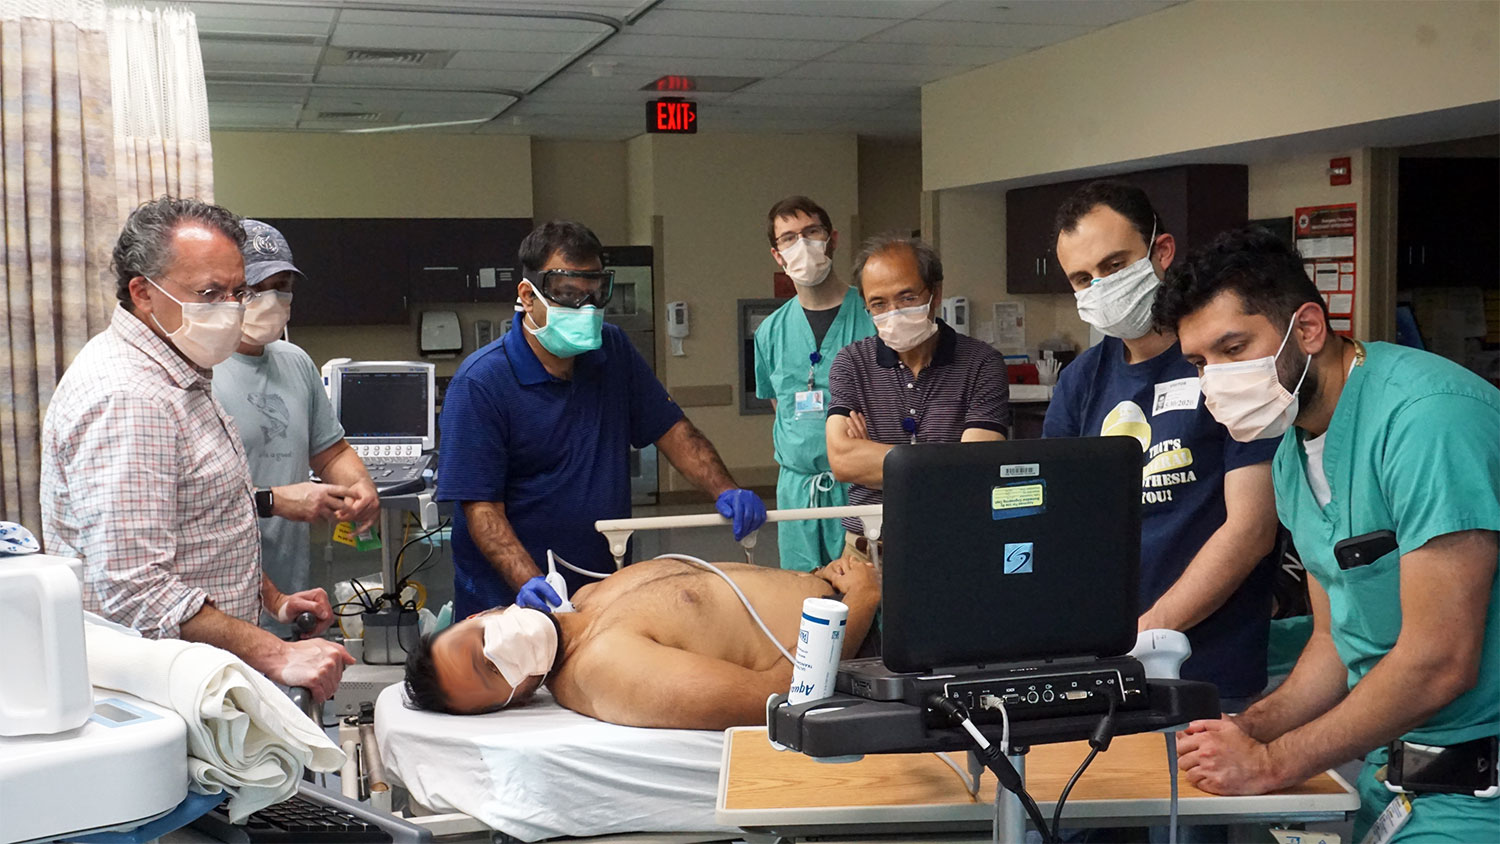 The Charter Anesthesia team learning together during an ultrasound workshop